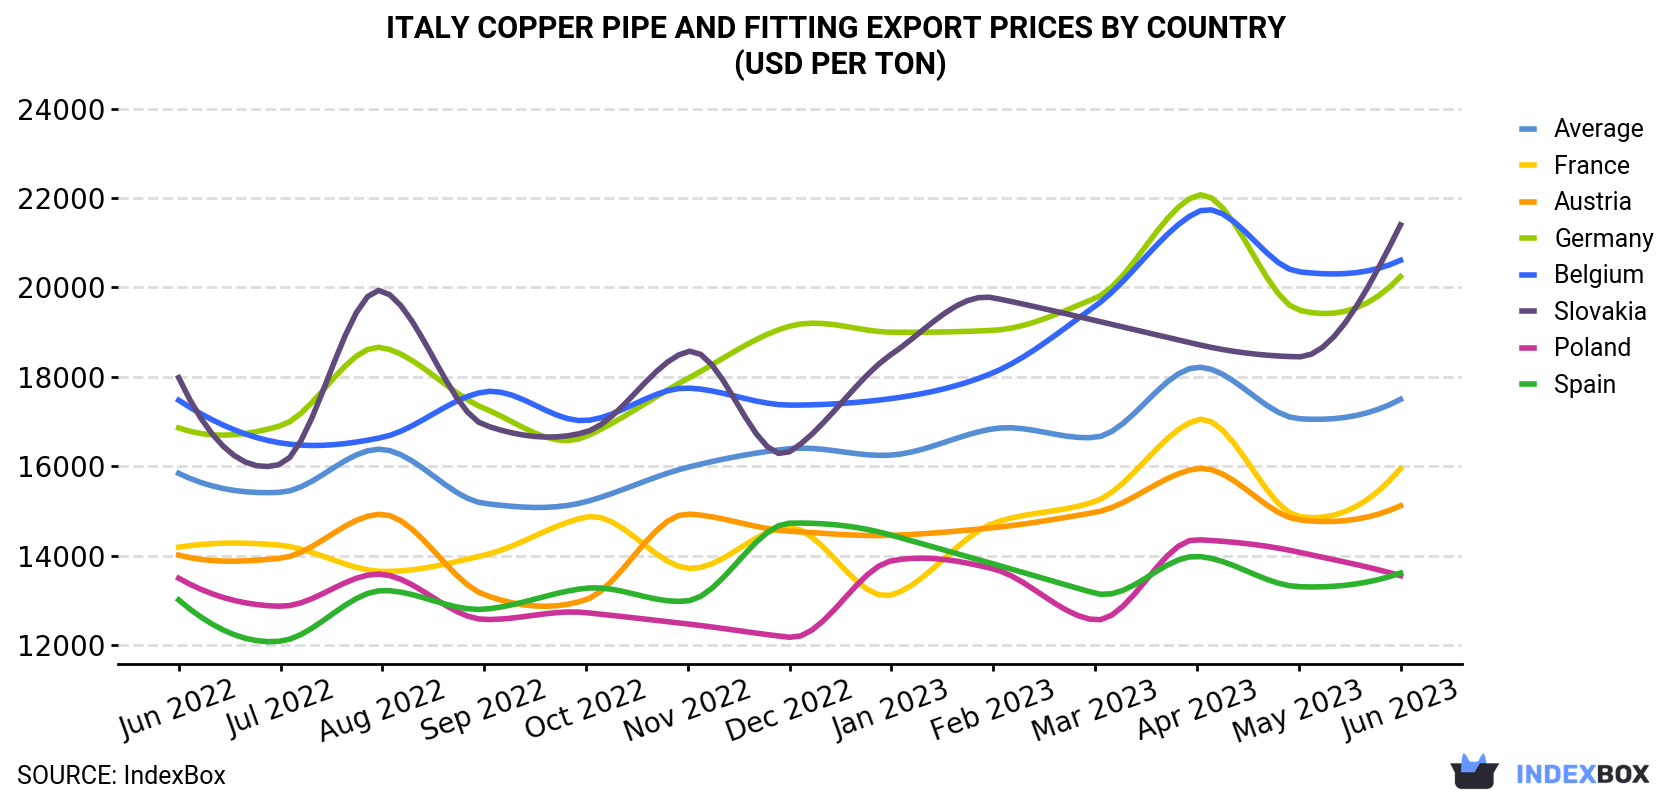 Italy Copper Pipe And Fitting Export Prices By Country (USD Per Ton)